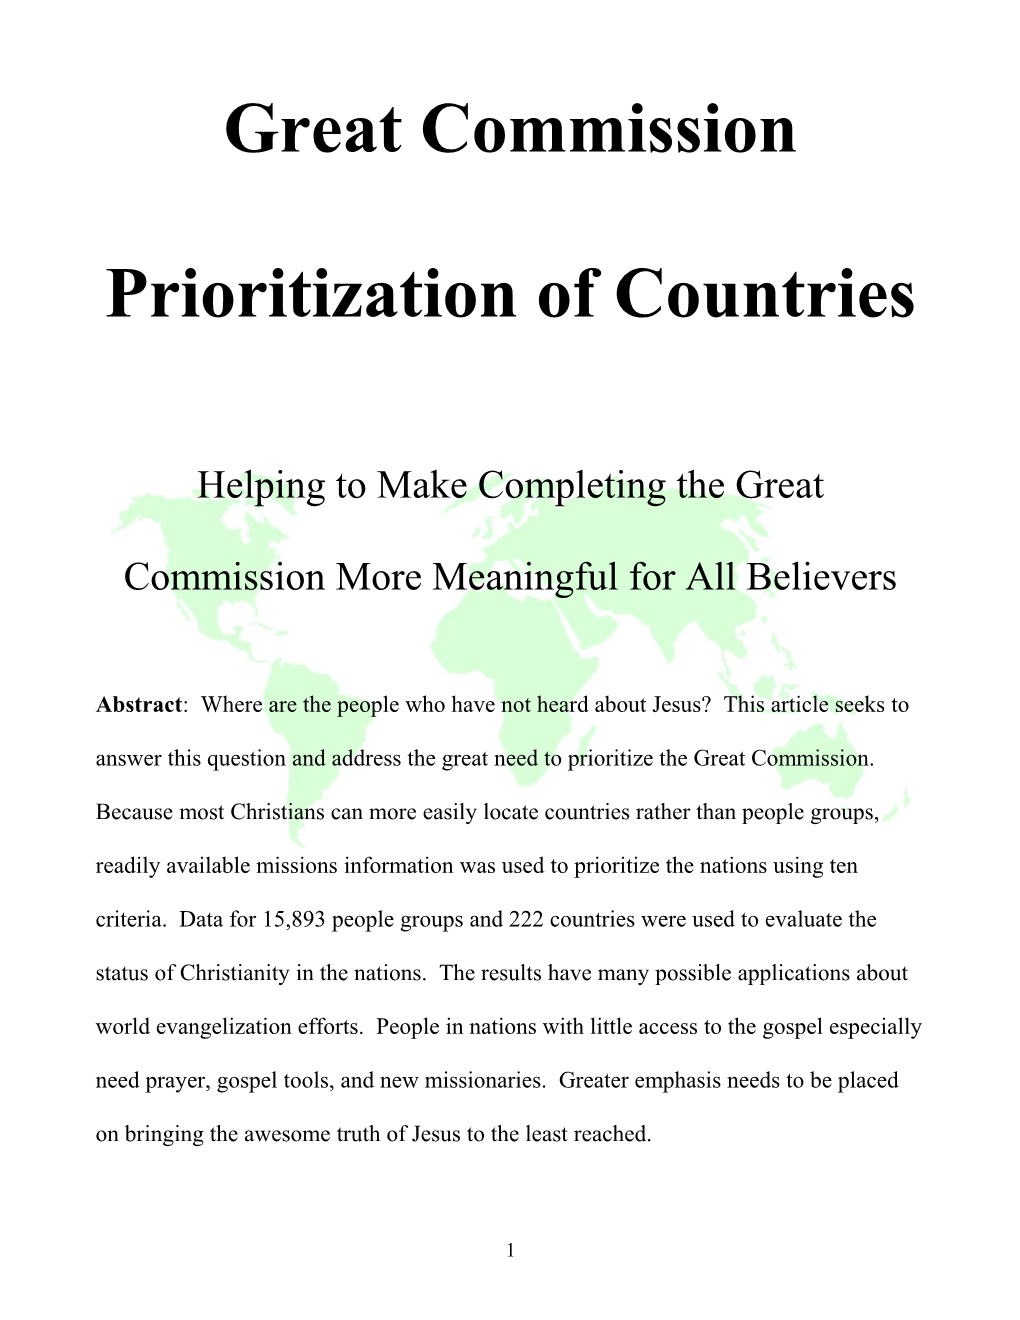 Great Commission Prioritization of Countries